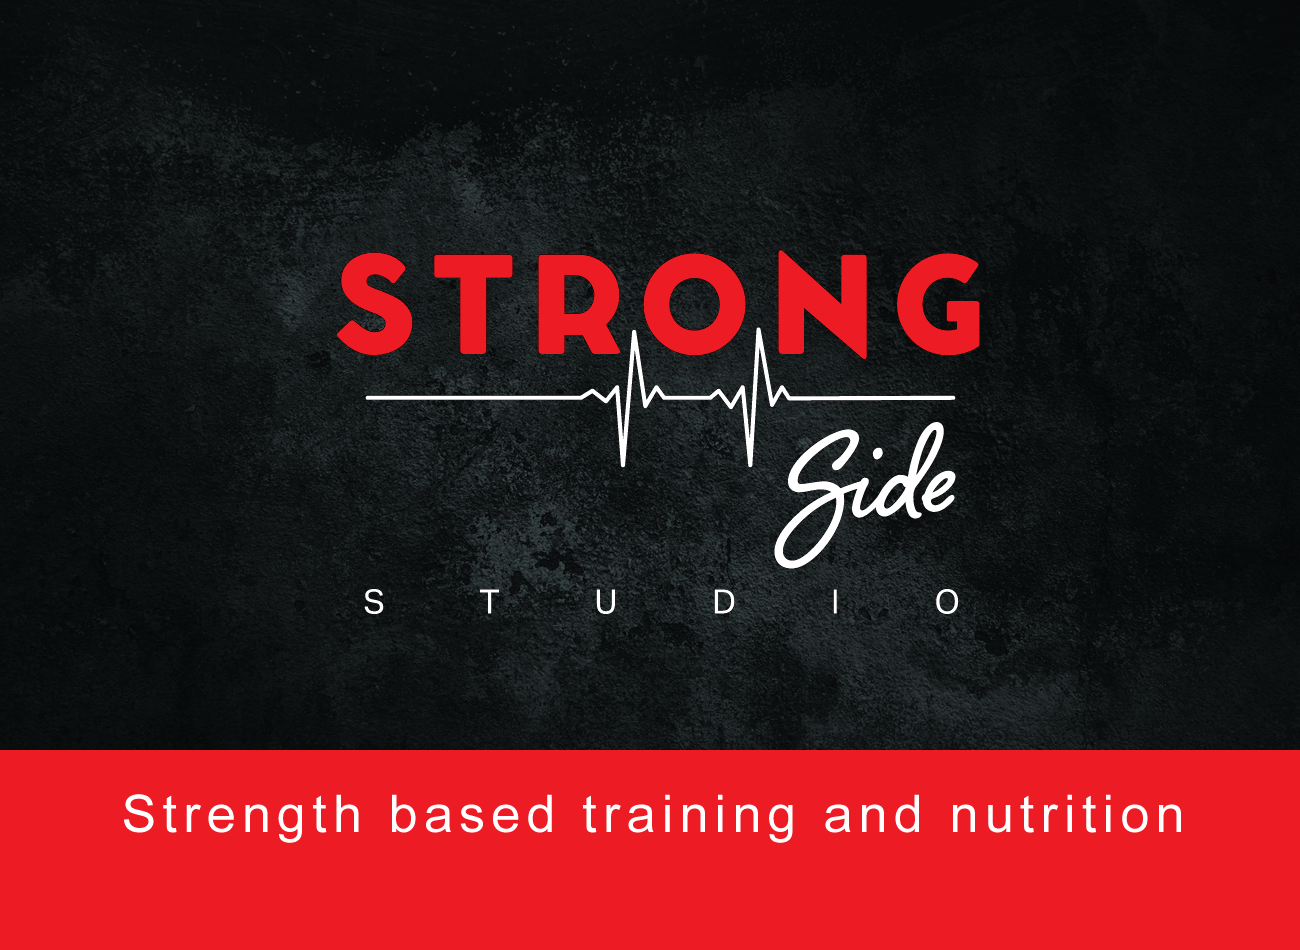 Strength based gym, classes with Cardio, strength training and nutrition